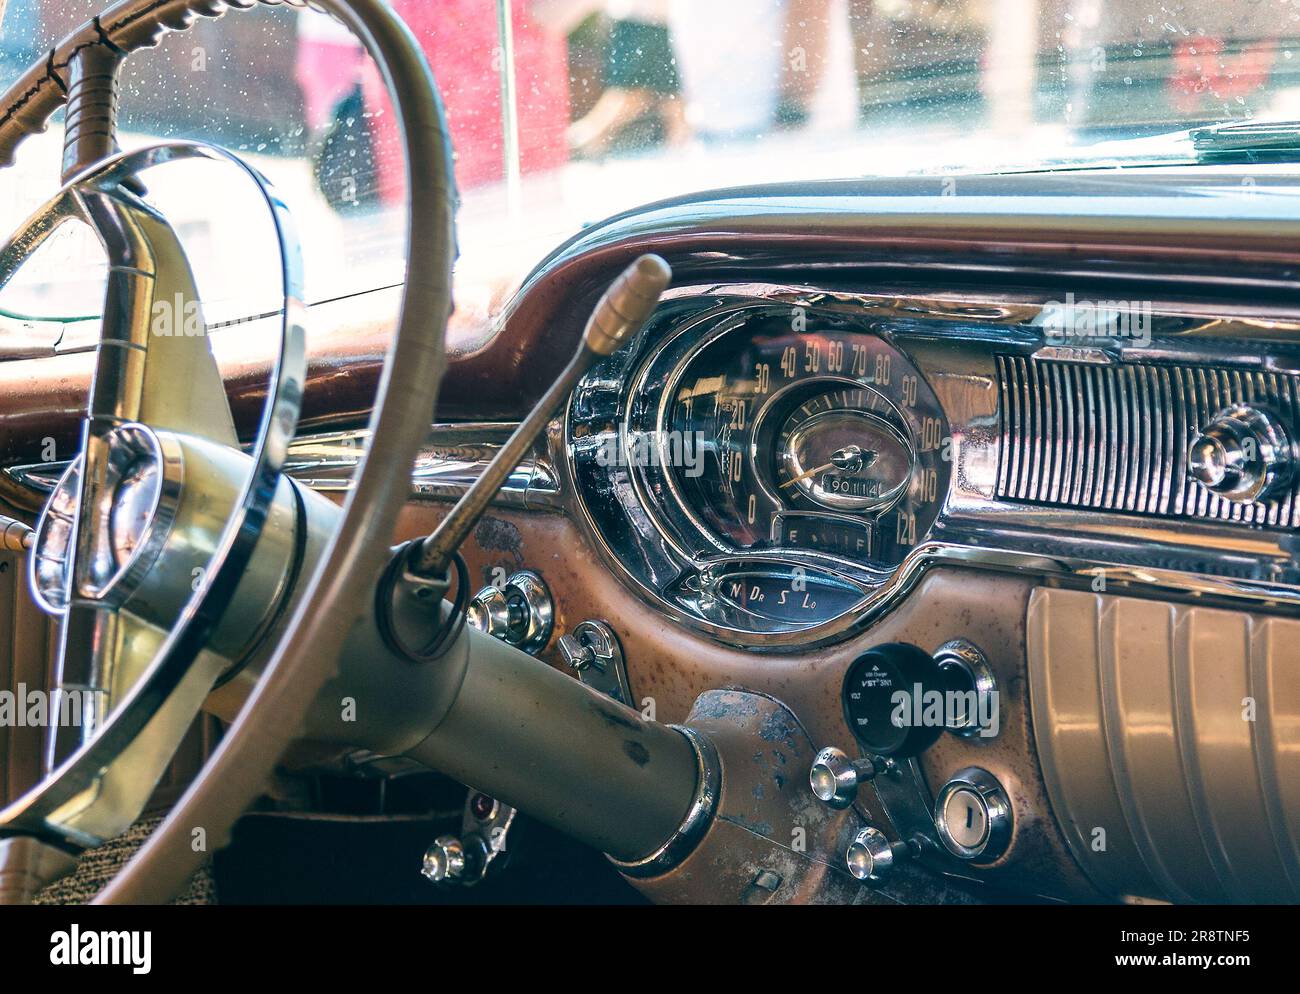 The Stylish interior of a 1950s Oldsmobile Rocket 88 offers timeless elegance and nostalgia for many car enthusiasts. Stock Photo